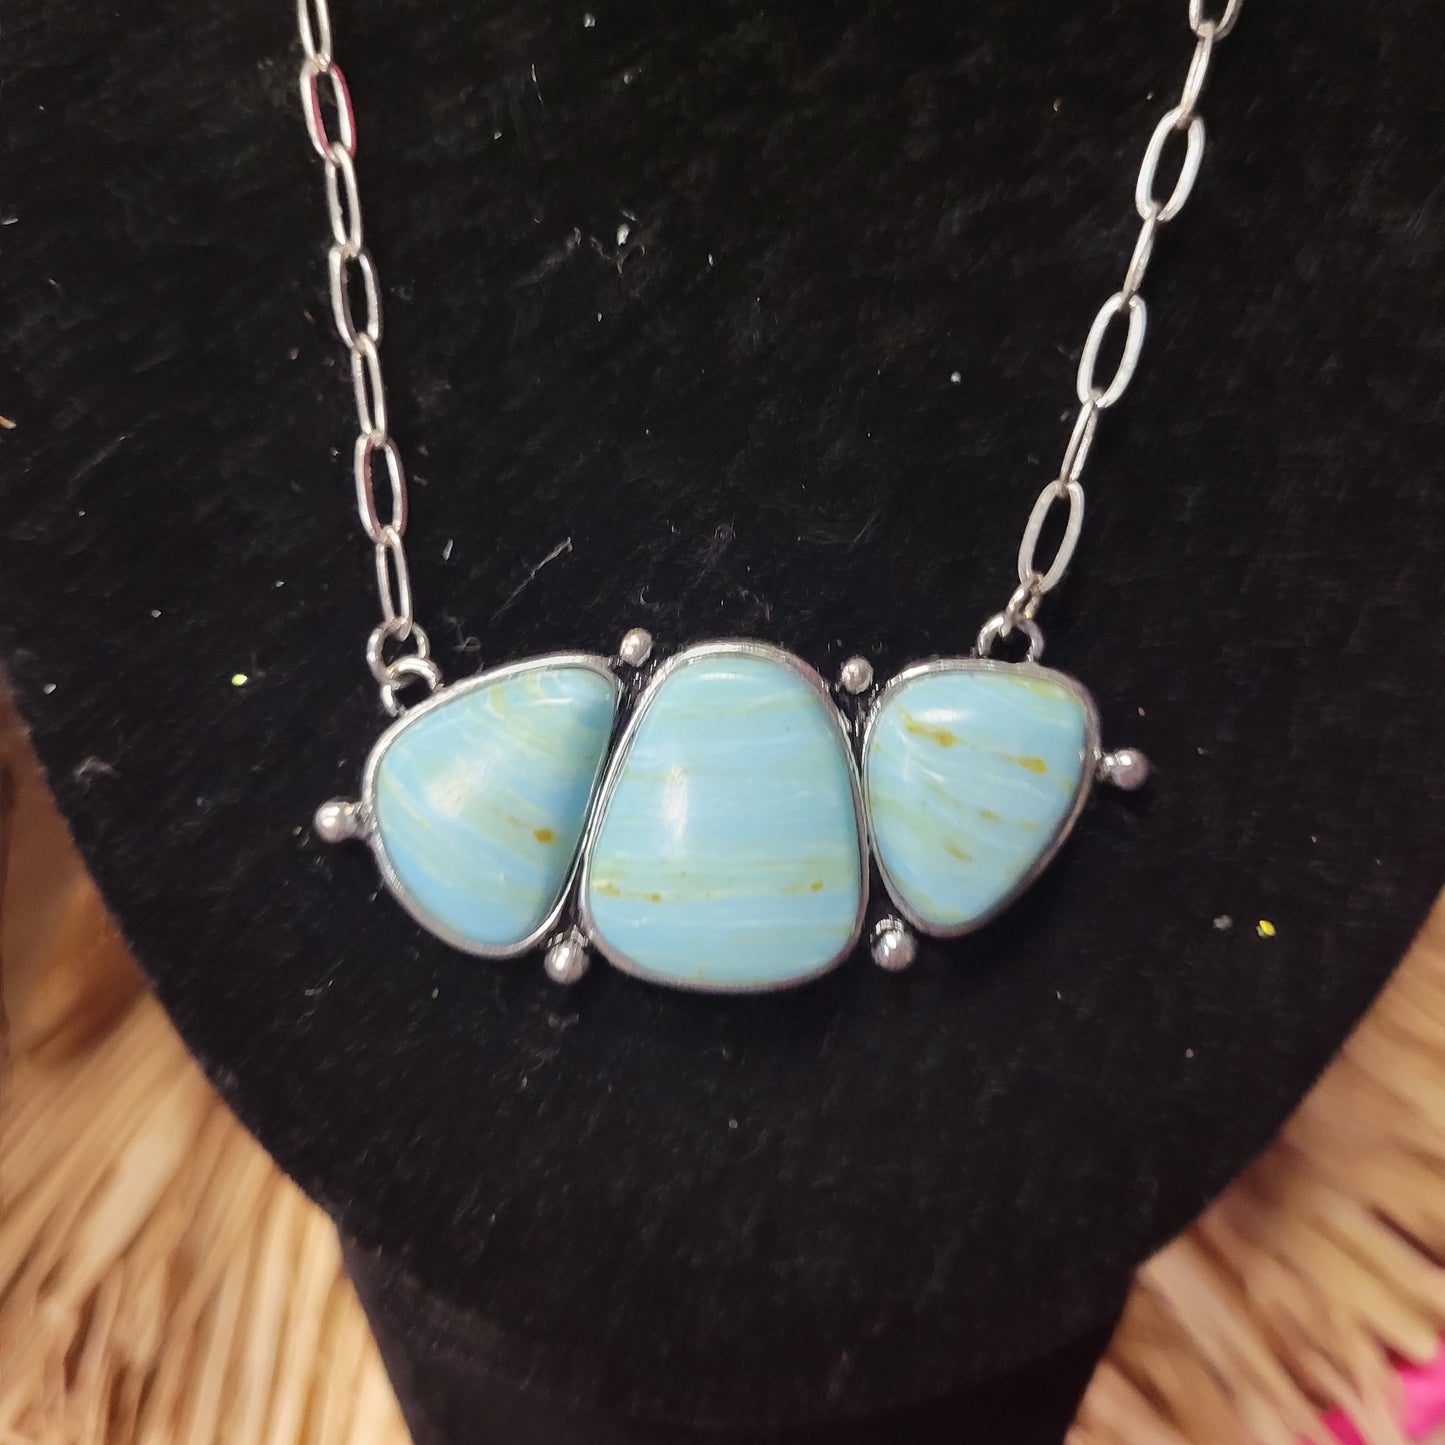 Stillwater Necklace [turquoise]